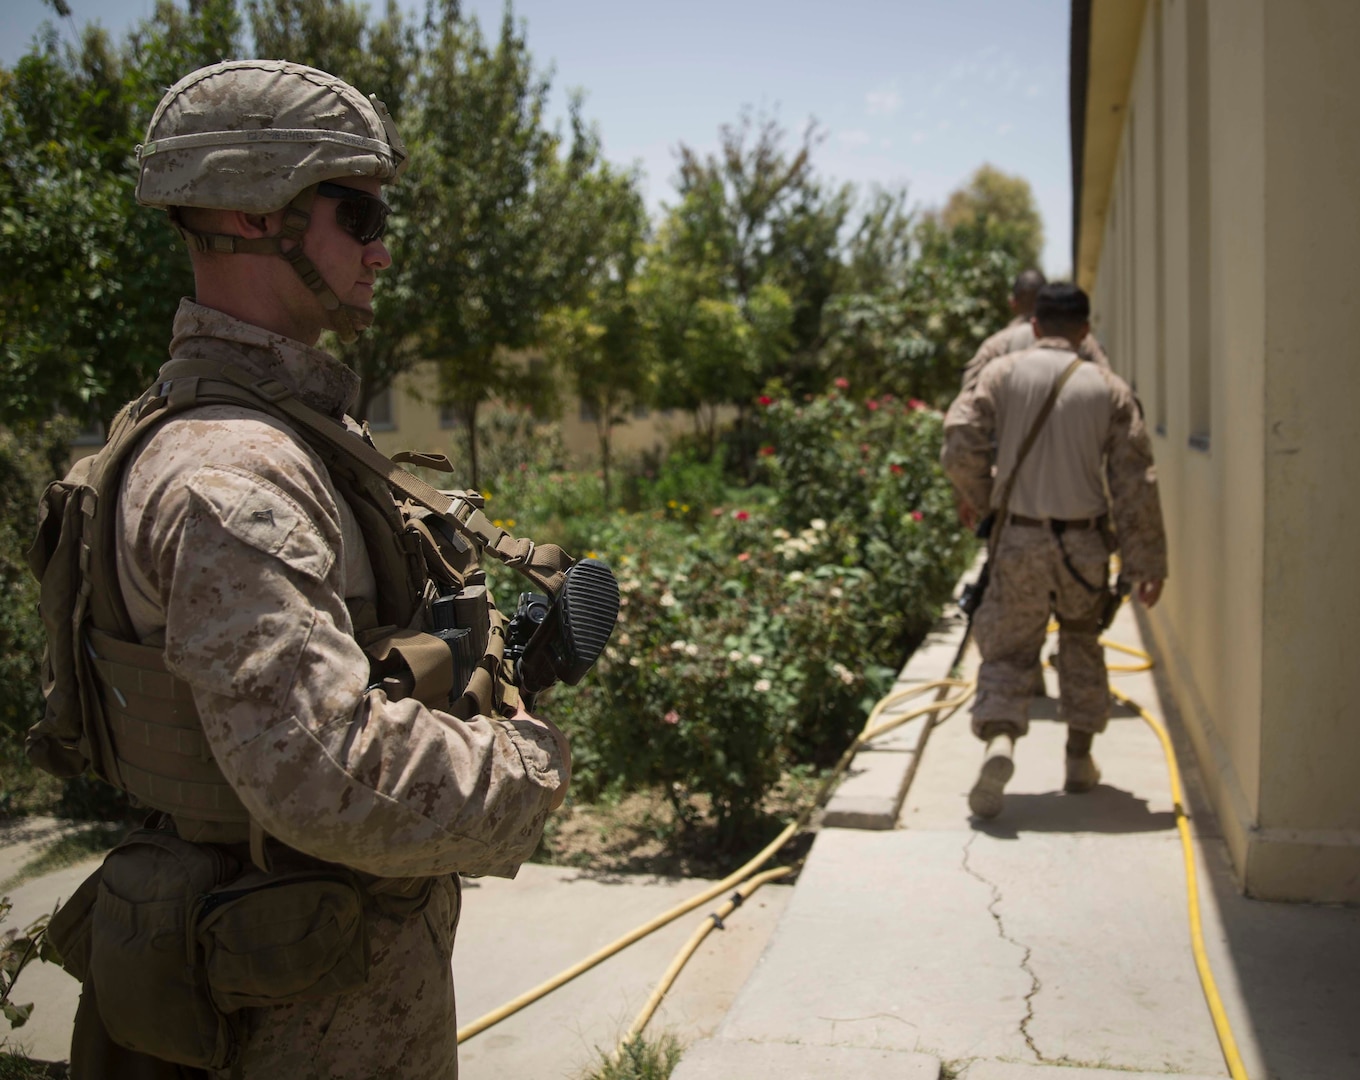 A U.S. Marine with Task Force Southwest provides security for the Marine advisors at the Helmand Provincial Police Headquarters in Lashkar Gah, Afghanistan, July 9, 2017. Task Force Southwest, comprised of approximately 300 Marines and Sailors from II Marine Expeditionary Force, are training, advising and assisting the Afghan National Army 215th Corps and the 505th Zone National Police. (U.S. Marine Corps photo by Sgt. Justin T. Updegraff)